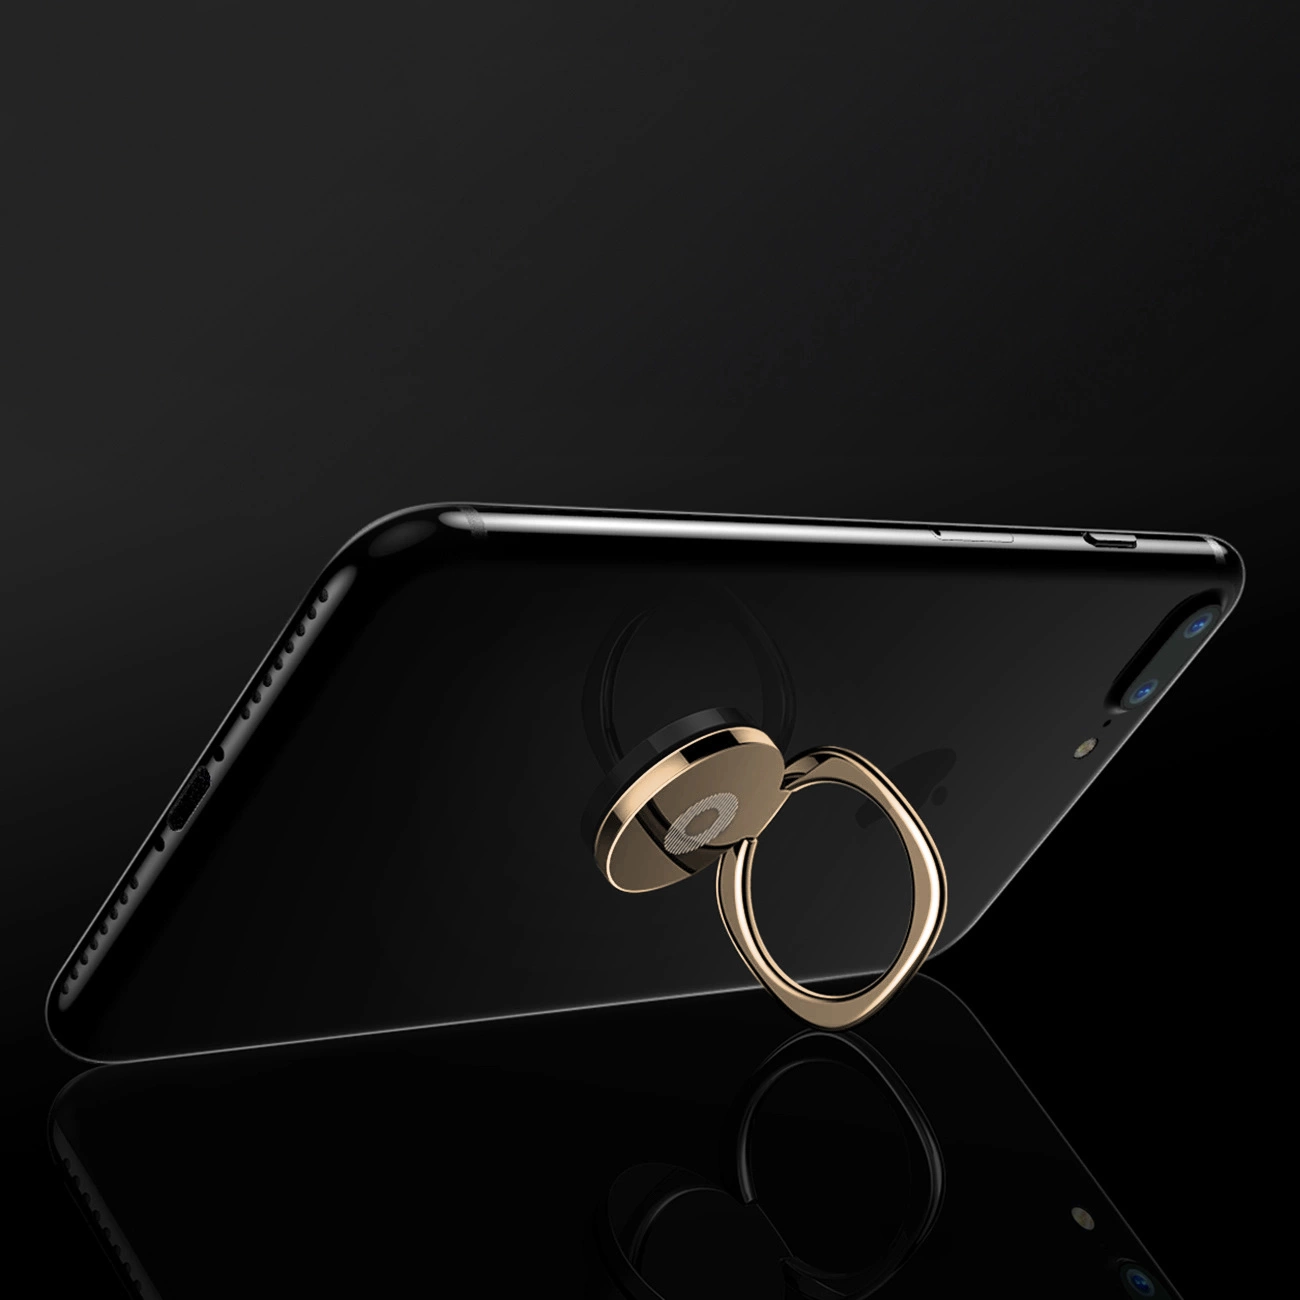 An unfolded Baseus Privity Ring holder with an attached phone leaning on a glass floor on a black background